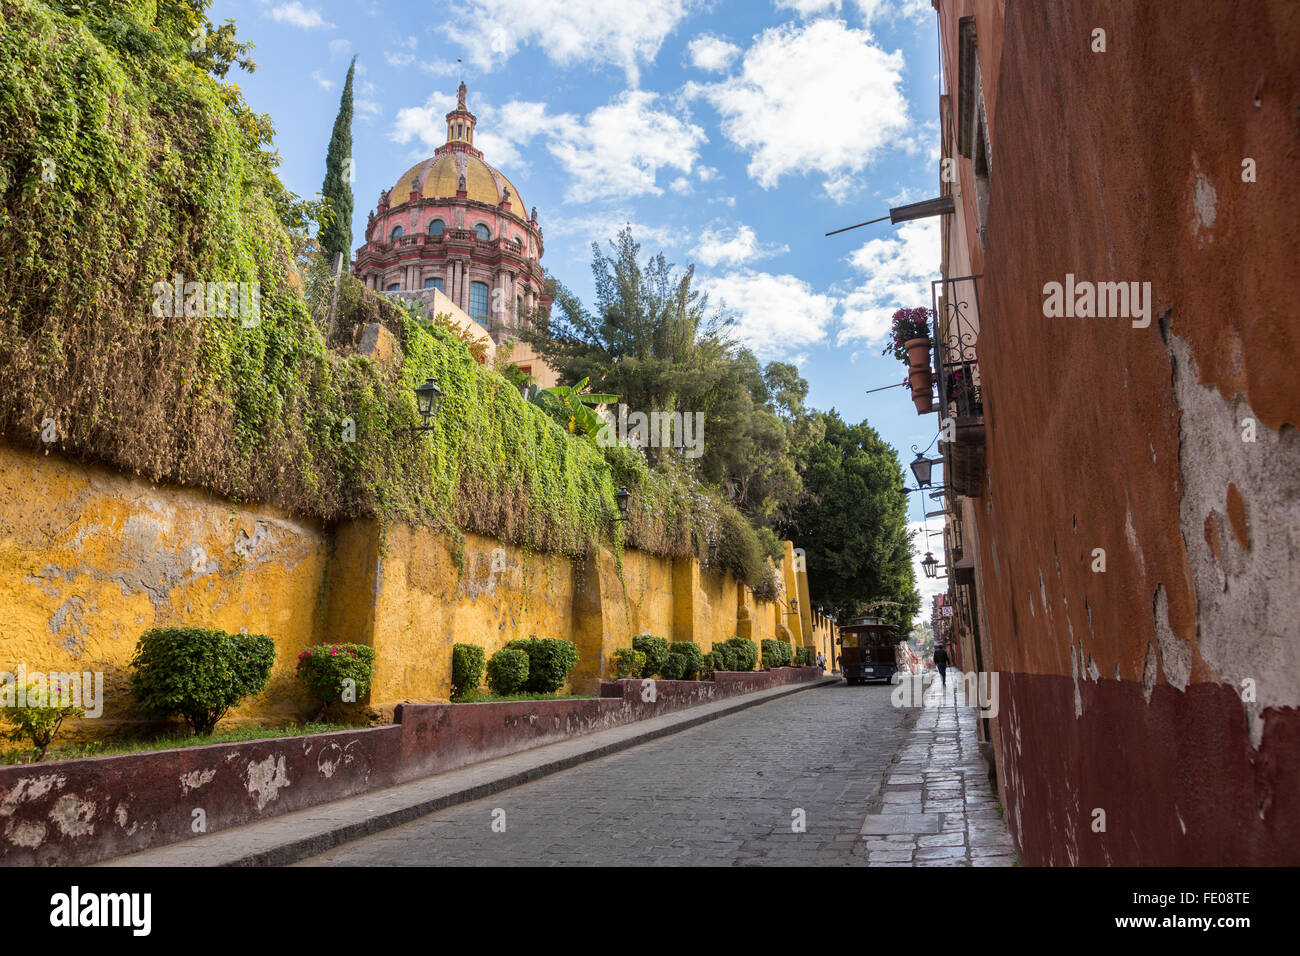 The dome of the Convent of the Immaculate Conception known as the Nuns along Canal Street in the historic center of San Miguel de Allende, Mexico. Stock Photo